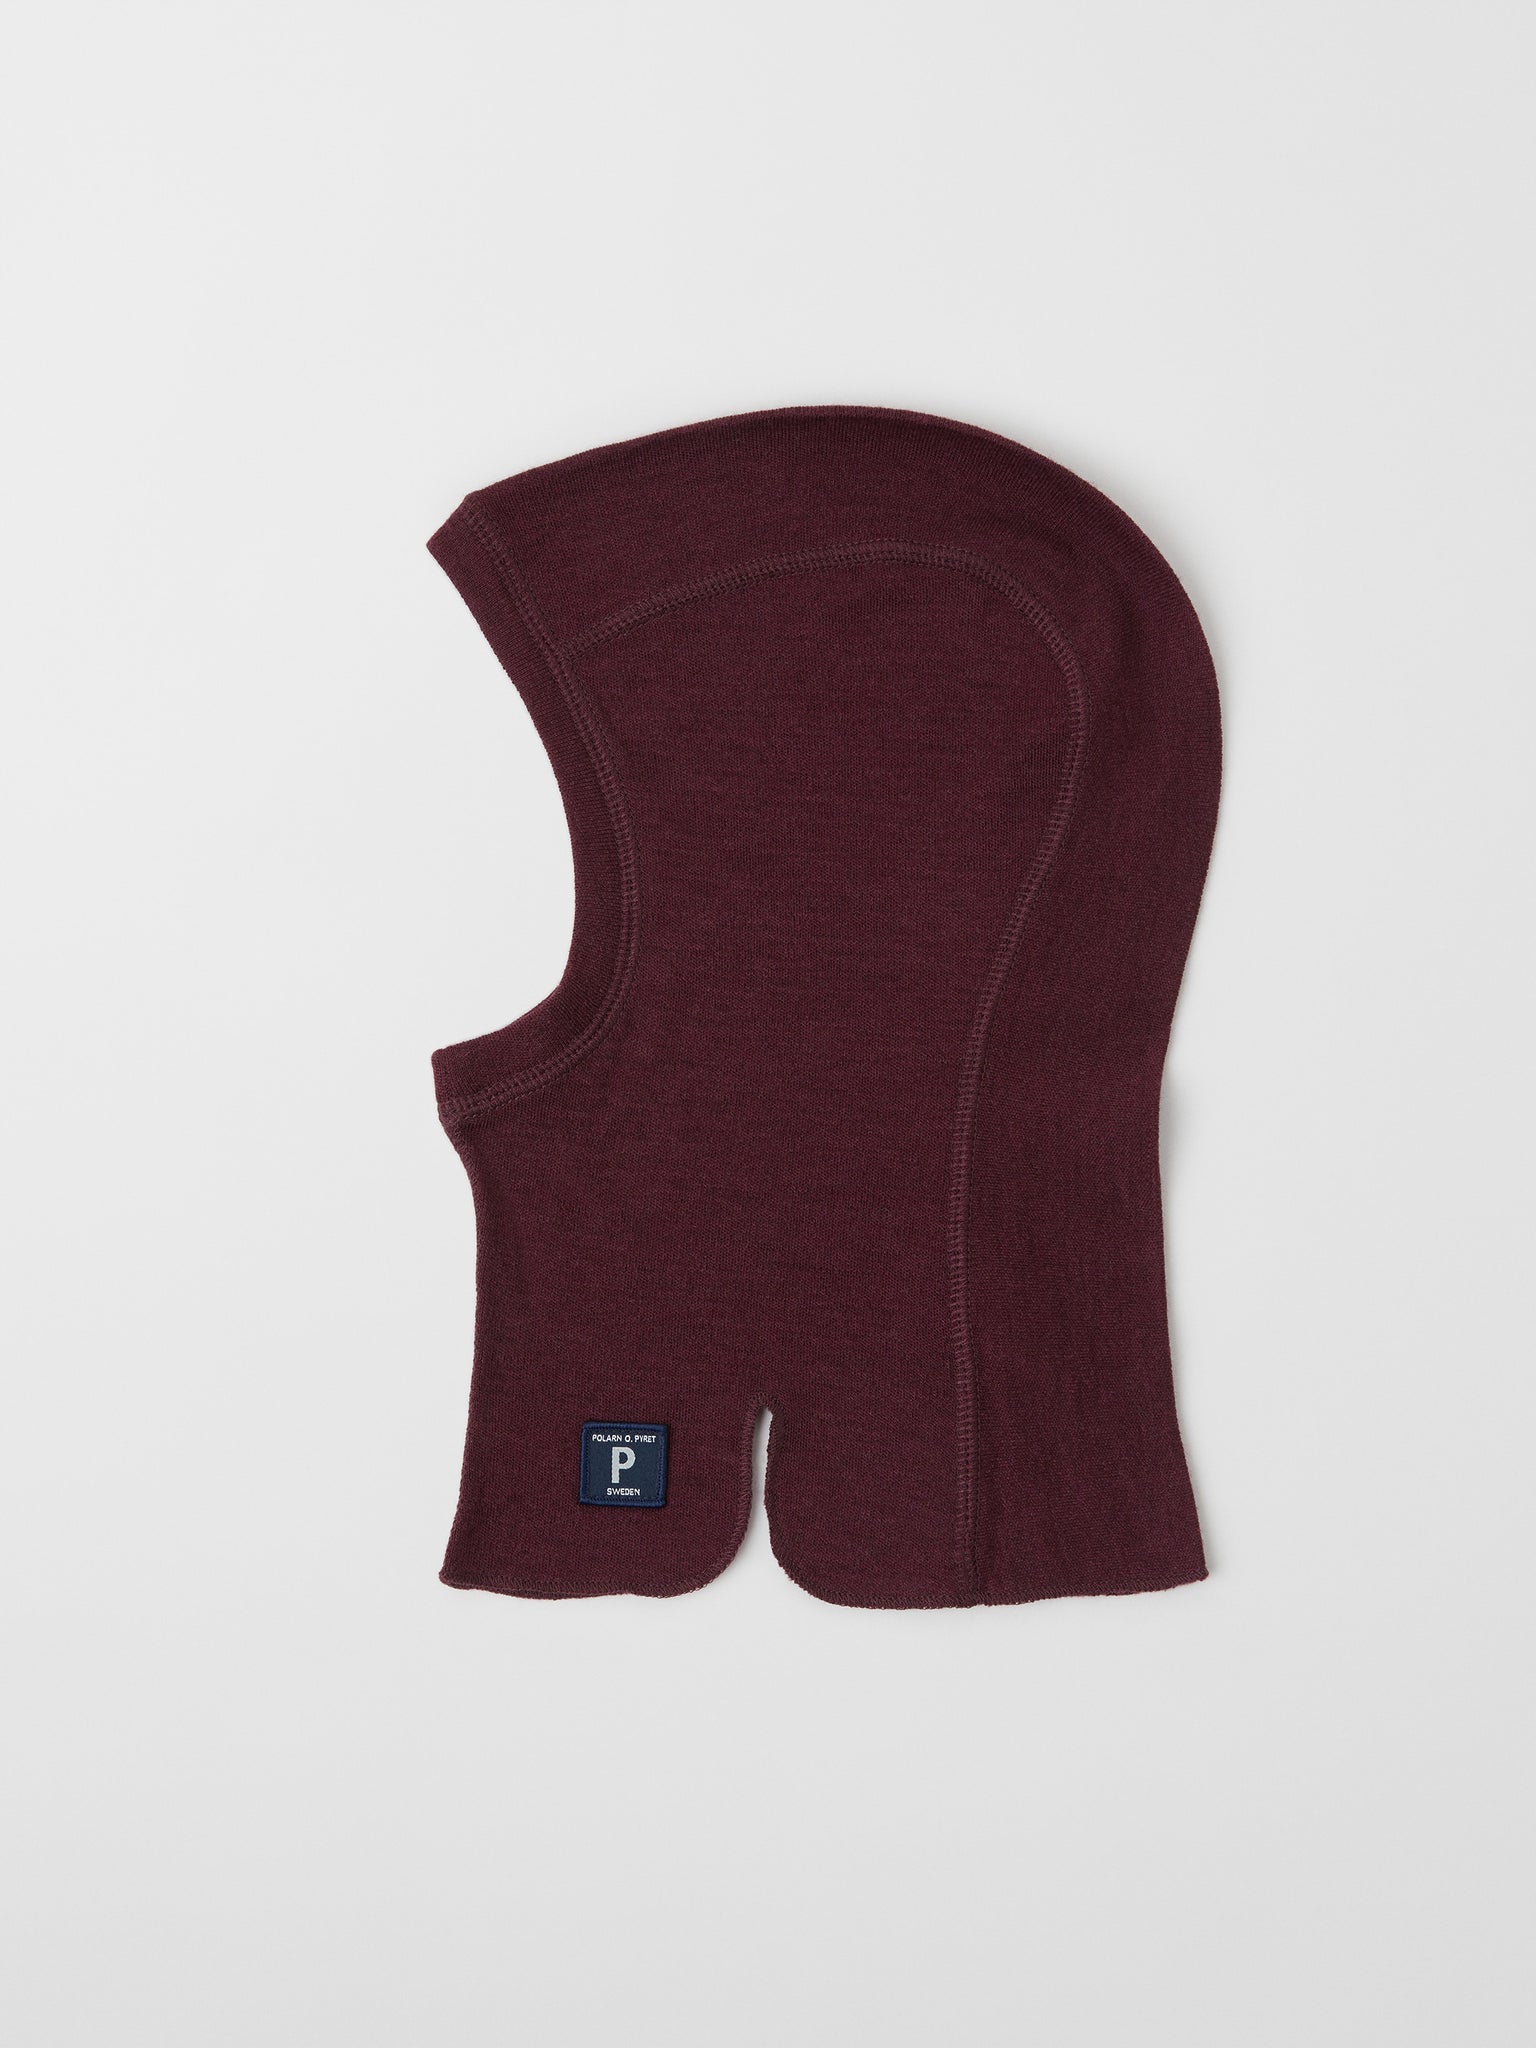 Merino Wool Burgundy Kids Balaclava from the Polarn O. Pyret outerwear collection. Kids outerwear made from sustainably source materials